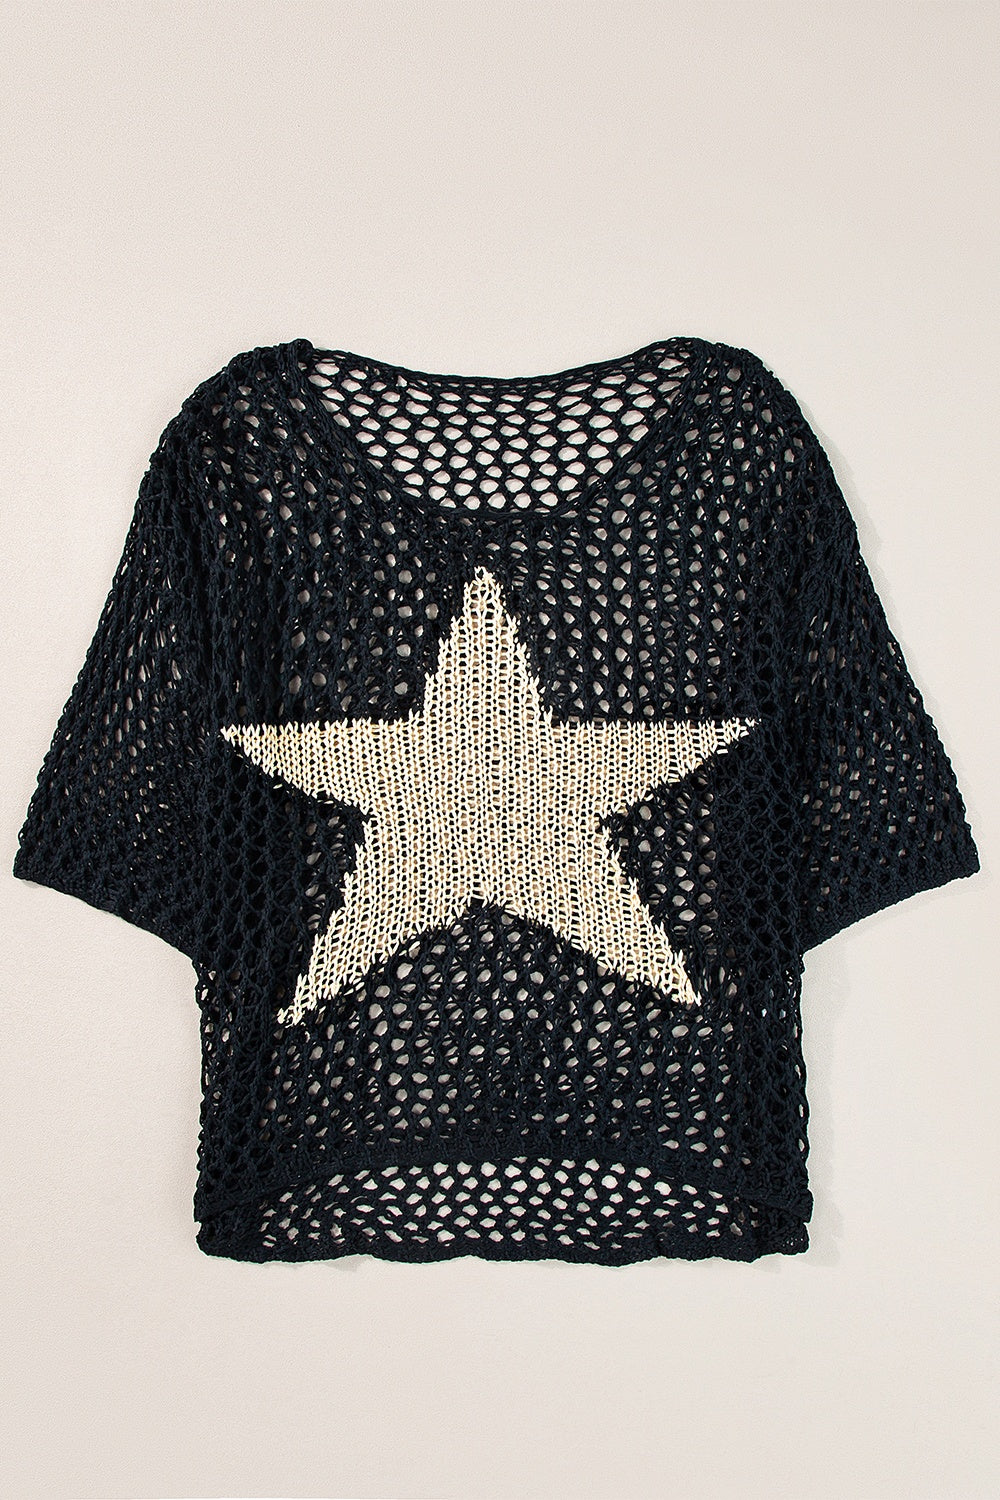 Openwork Star Boat Neck Knit Cover Up